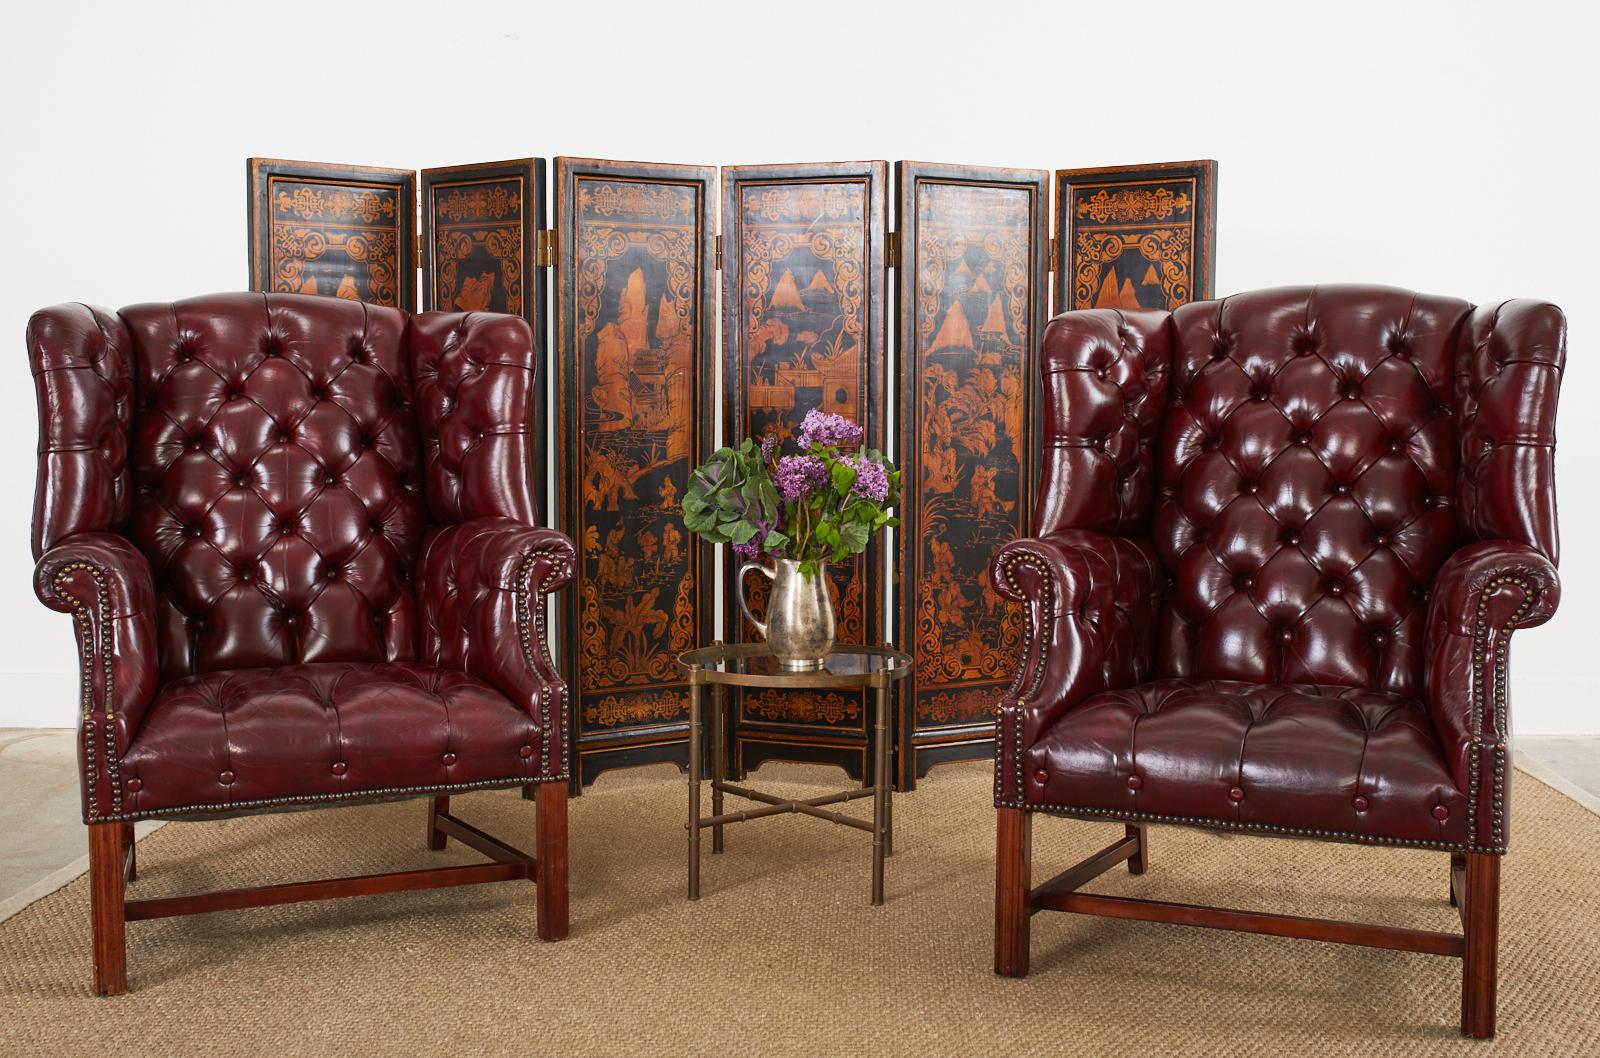 Stately pair of English cordovan or oxblood leather wingback armchairs made in the Georgian style. Crafted from mahogany frames with large, fully developed wings and English rolled arms. The handsome button tufted leather is accented by brass tack